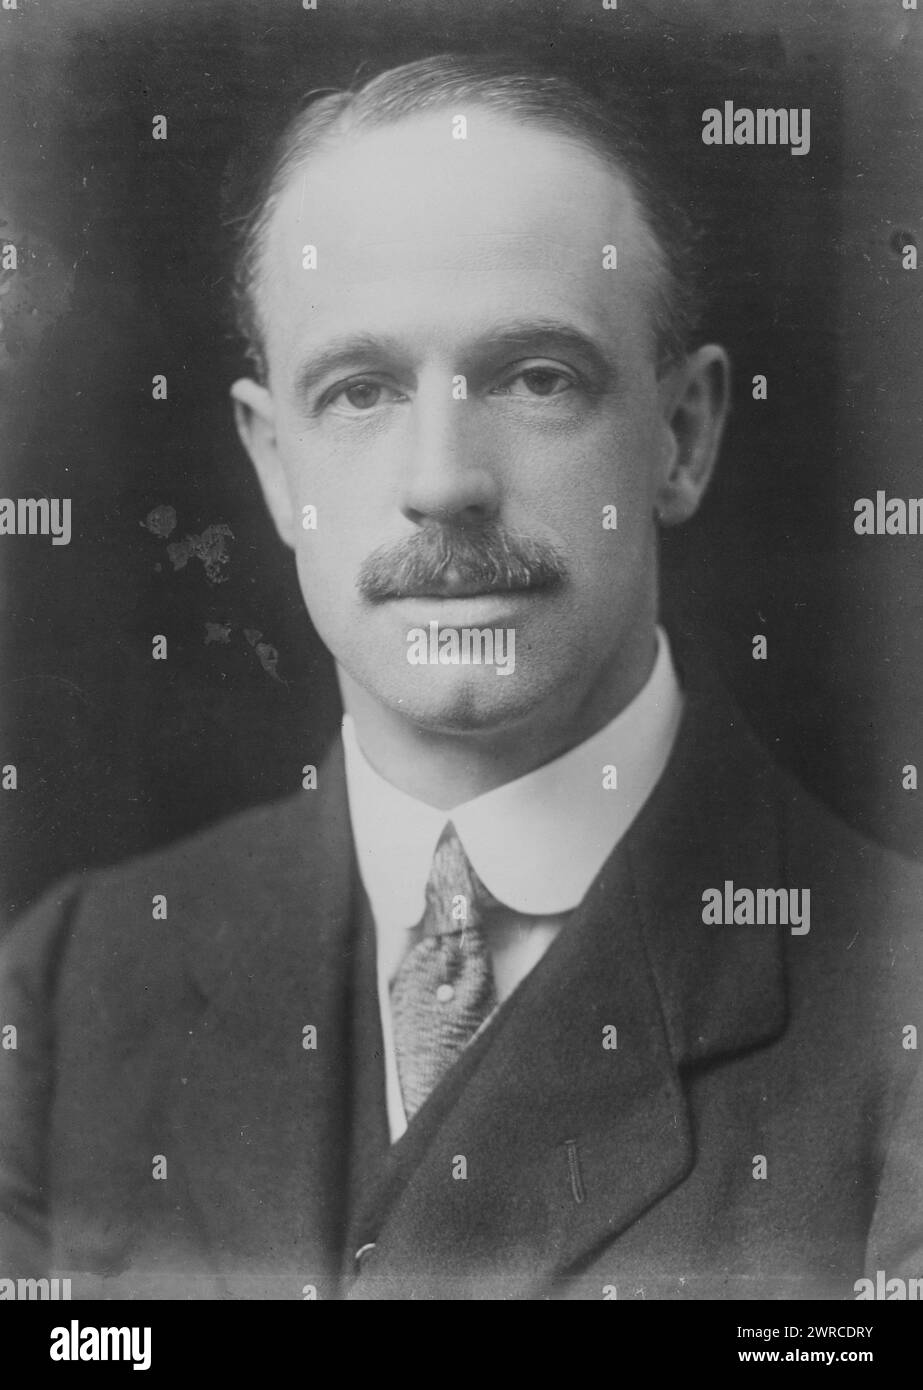 Sir Eric Drummond, Photograph shows Sir James Eric Drummond, 7th Earl of Perth (1876- 1951) who served as Secretary General of the League of Nations., between ca. 1915 and ca. 1920, Glass negatives, 1 negative: glass Stock Photo